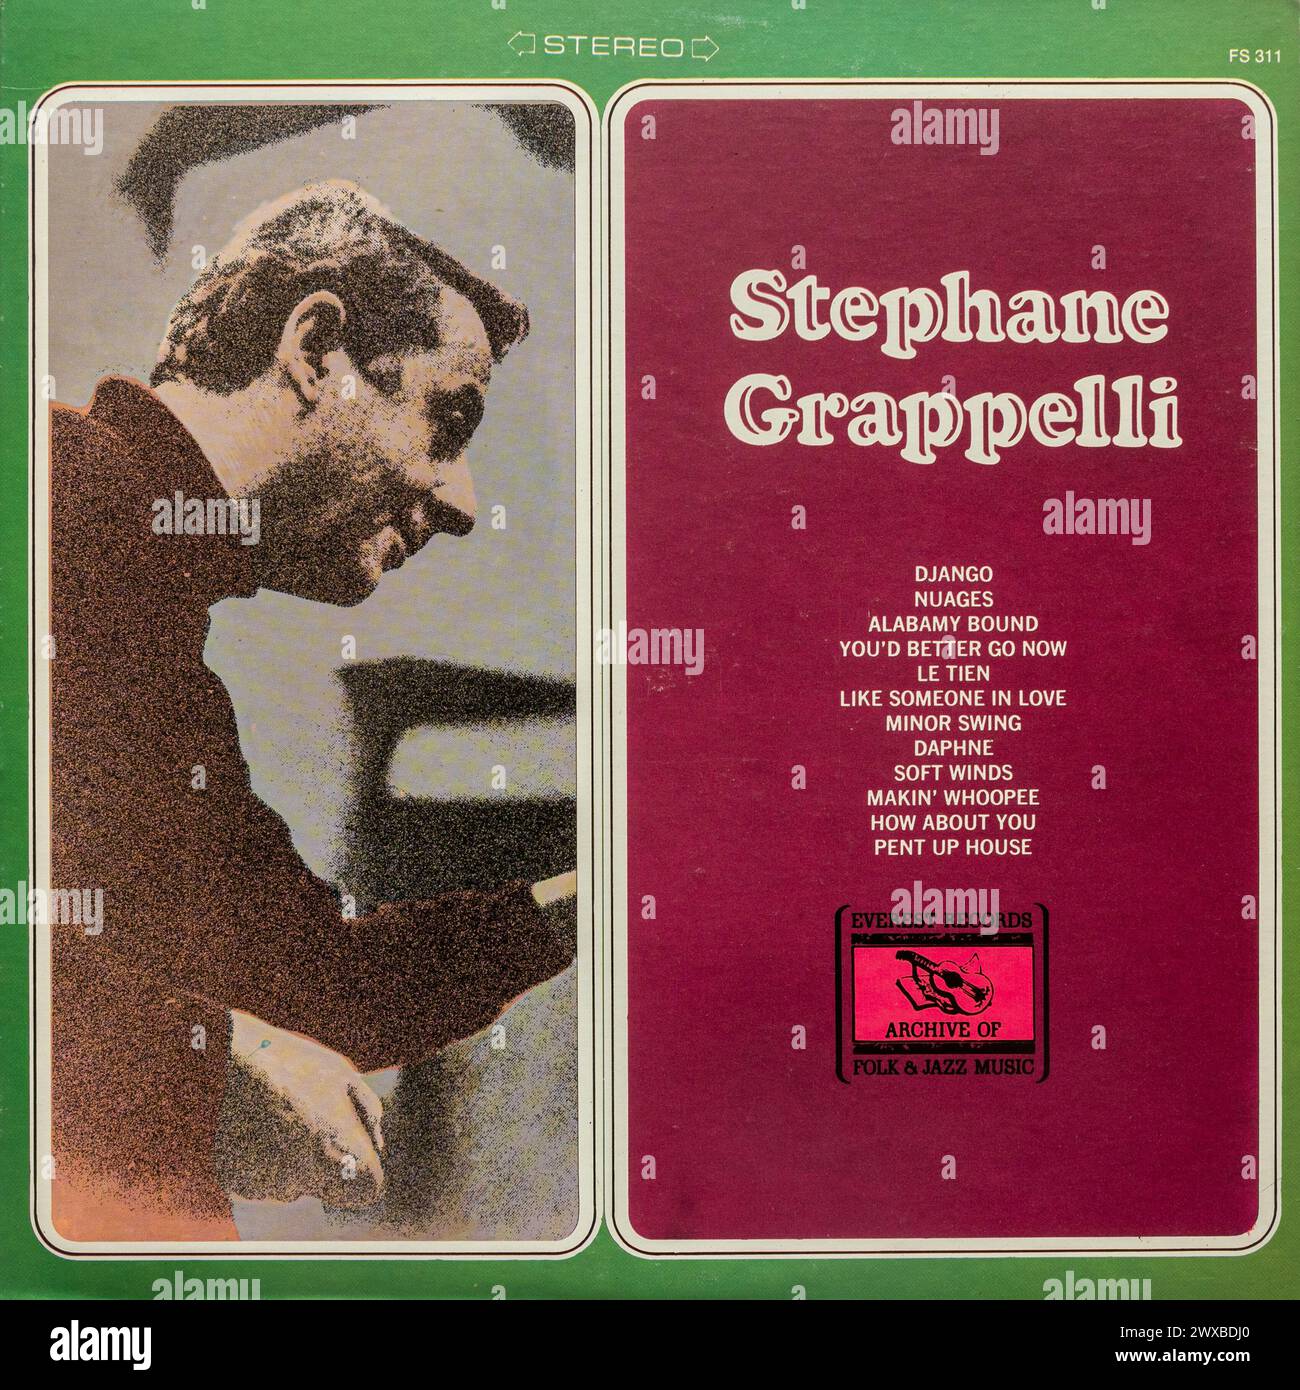 Album by Stephane Grappelli, the French jazz violinist, vinyl LP record cover Stock Photo